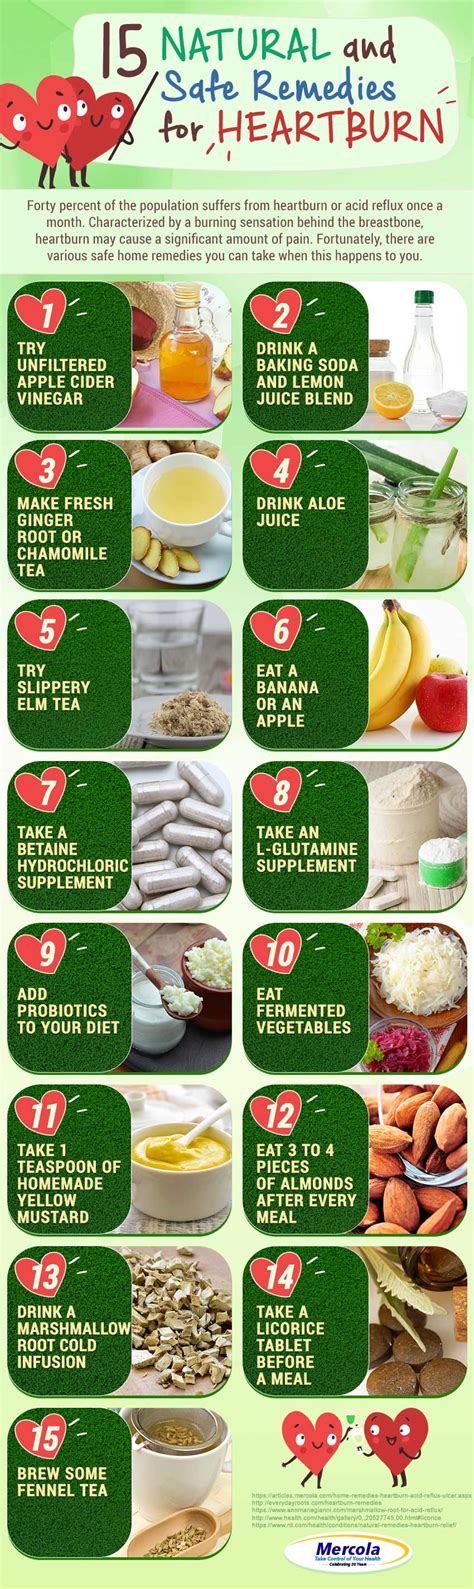 Foods That Help Acid Reflux Go Away Examples And Forms